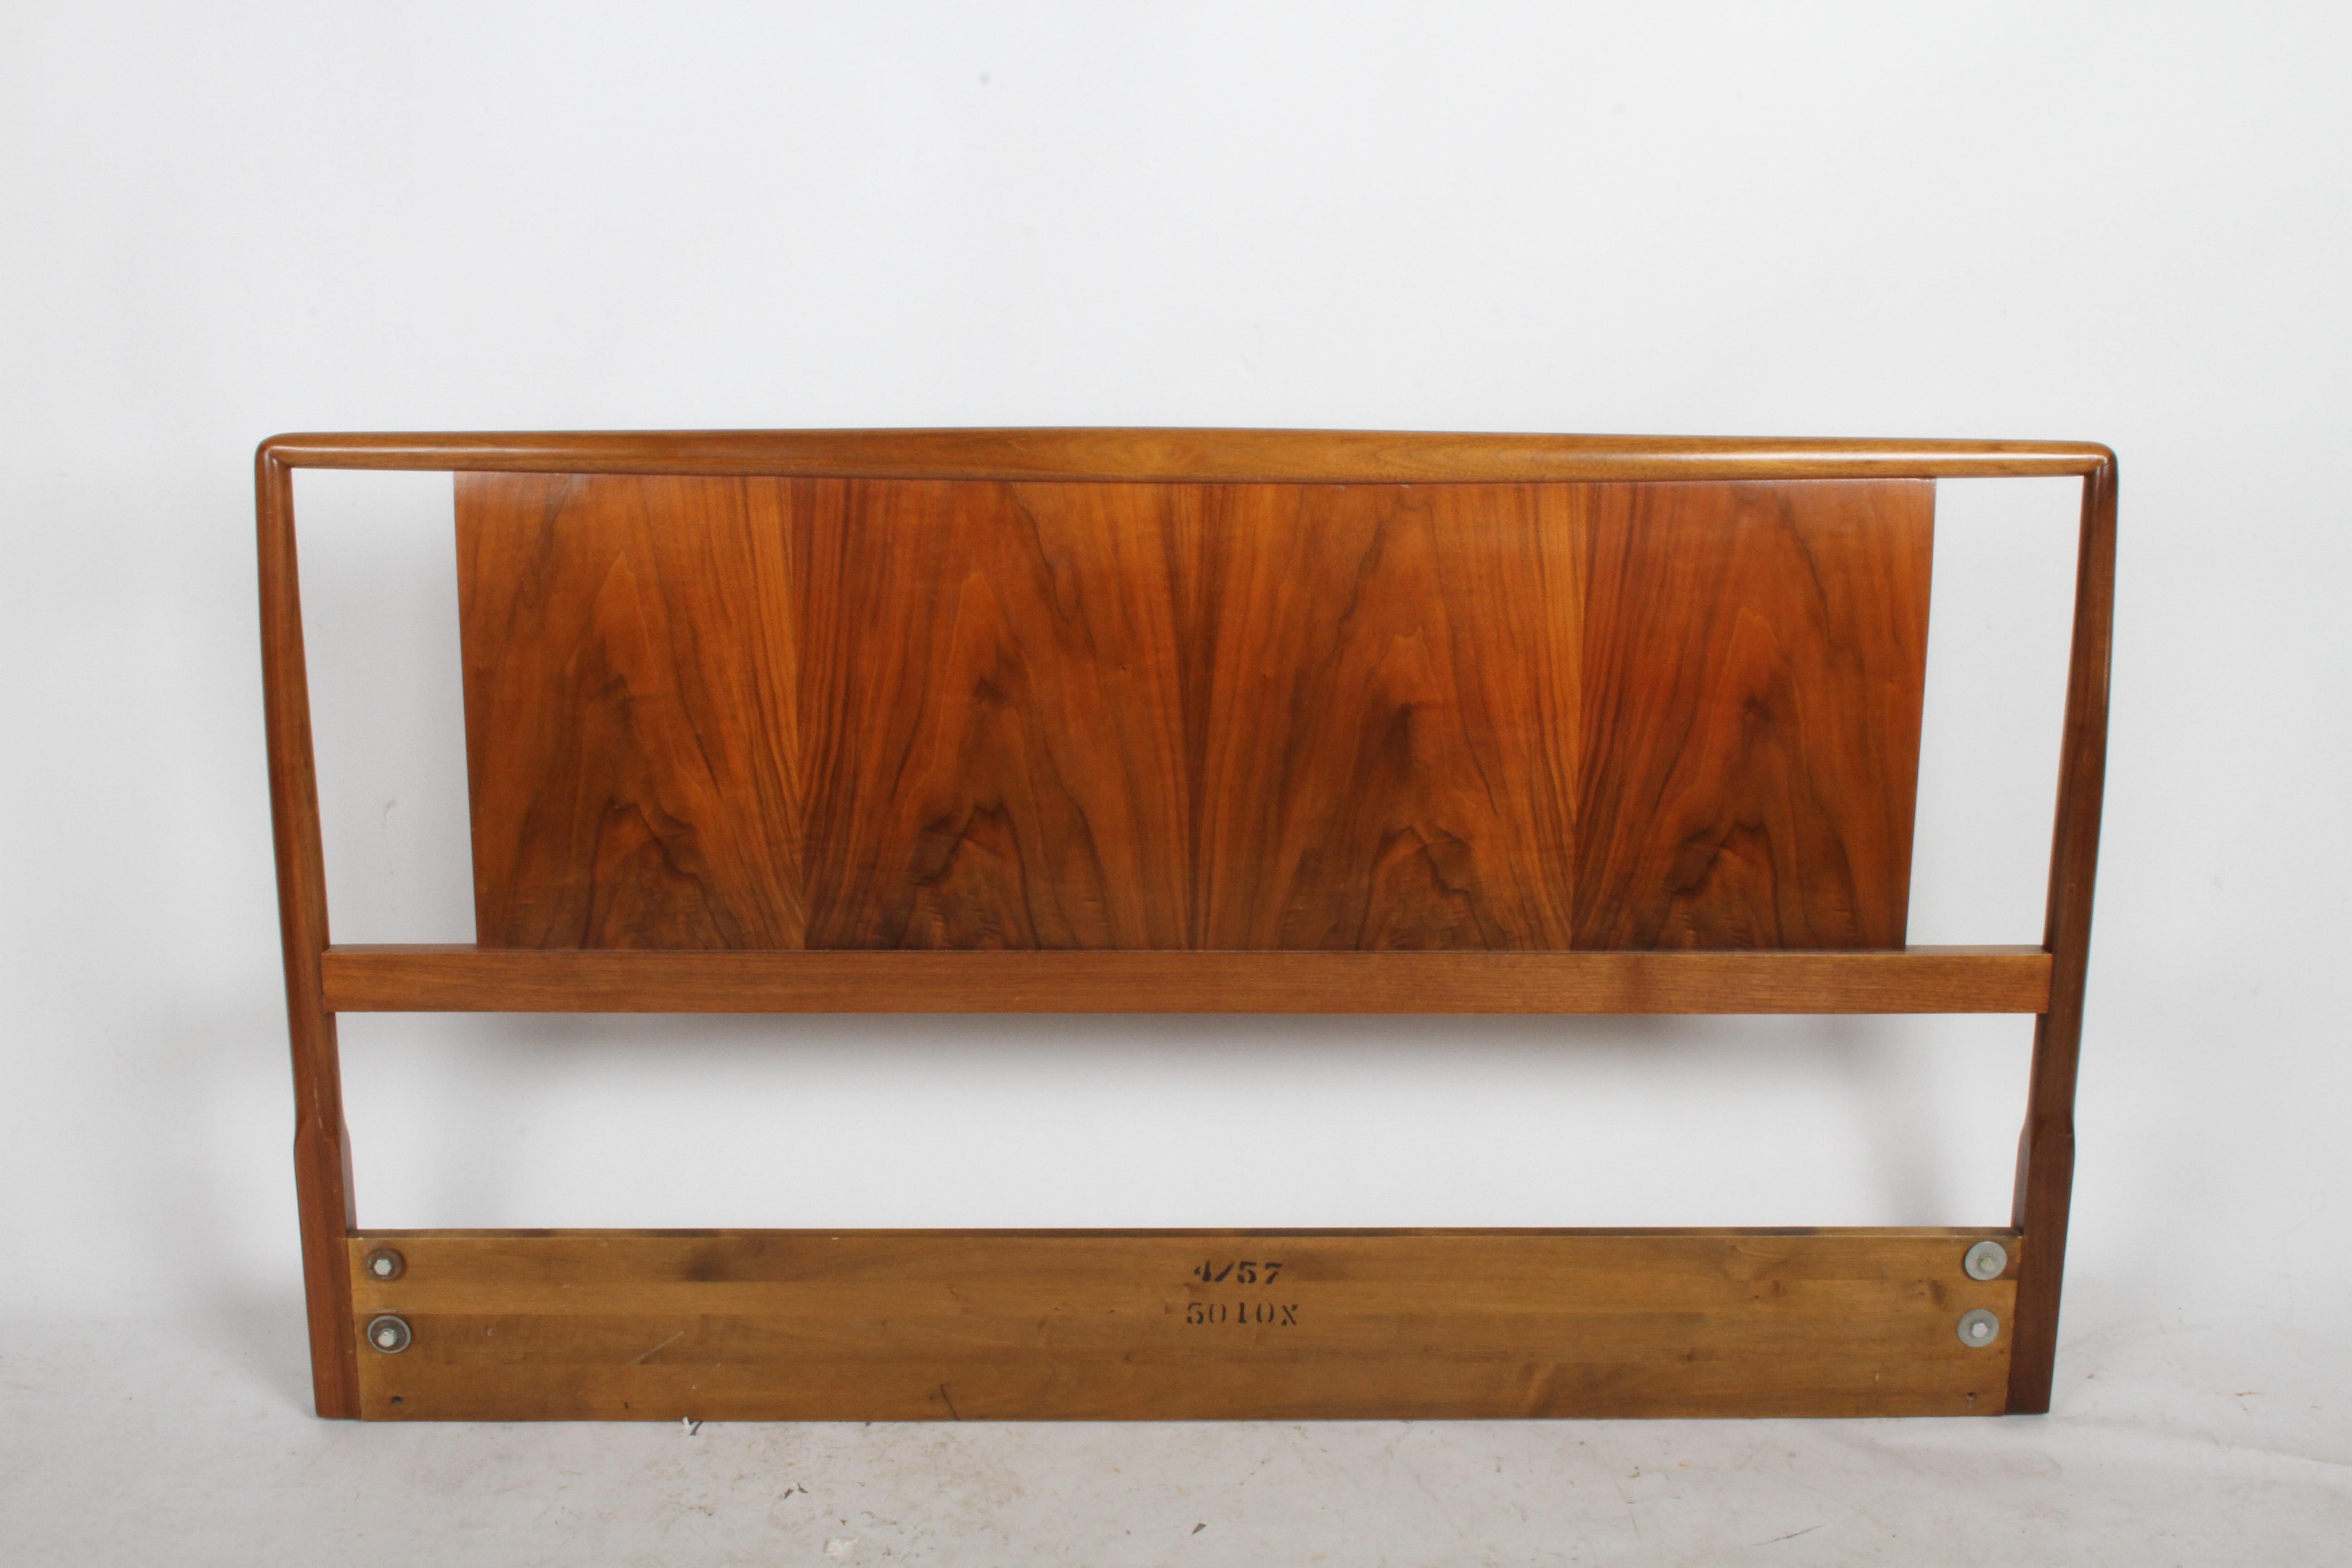 T.H. Robsjohns-Gibbings for Widdicomb full size headboard with book matched walnut. It seems to have been refinished at some point. Shows minor wear. Mounting hardware at 51.25